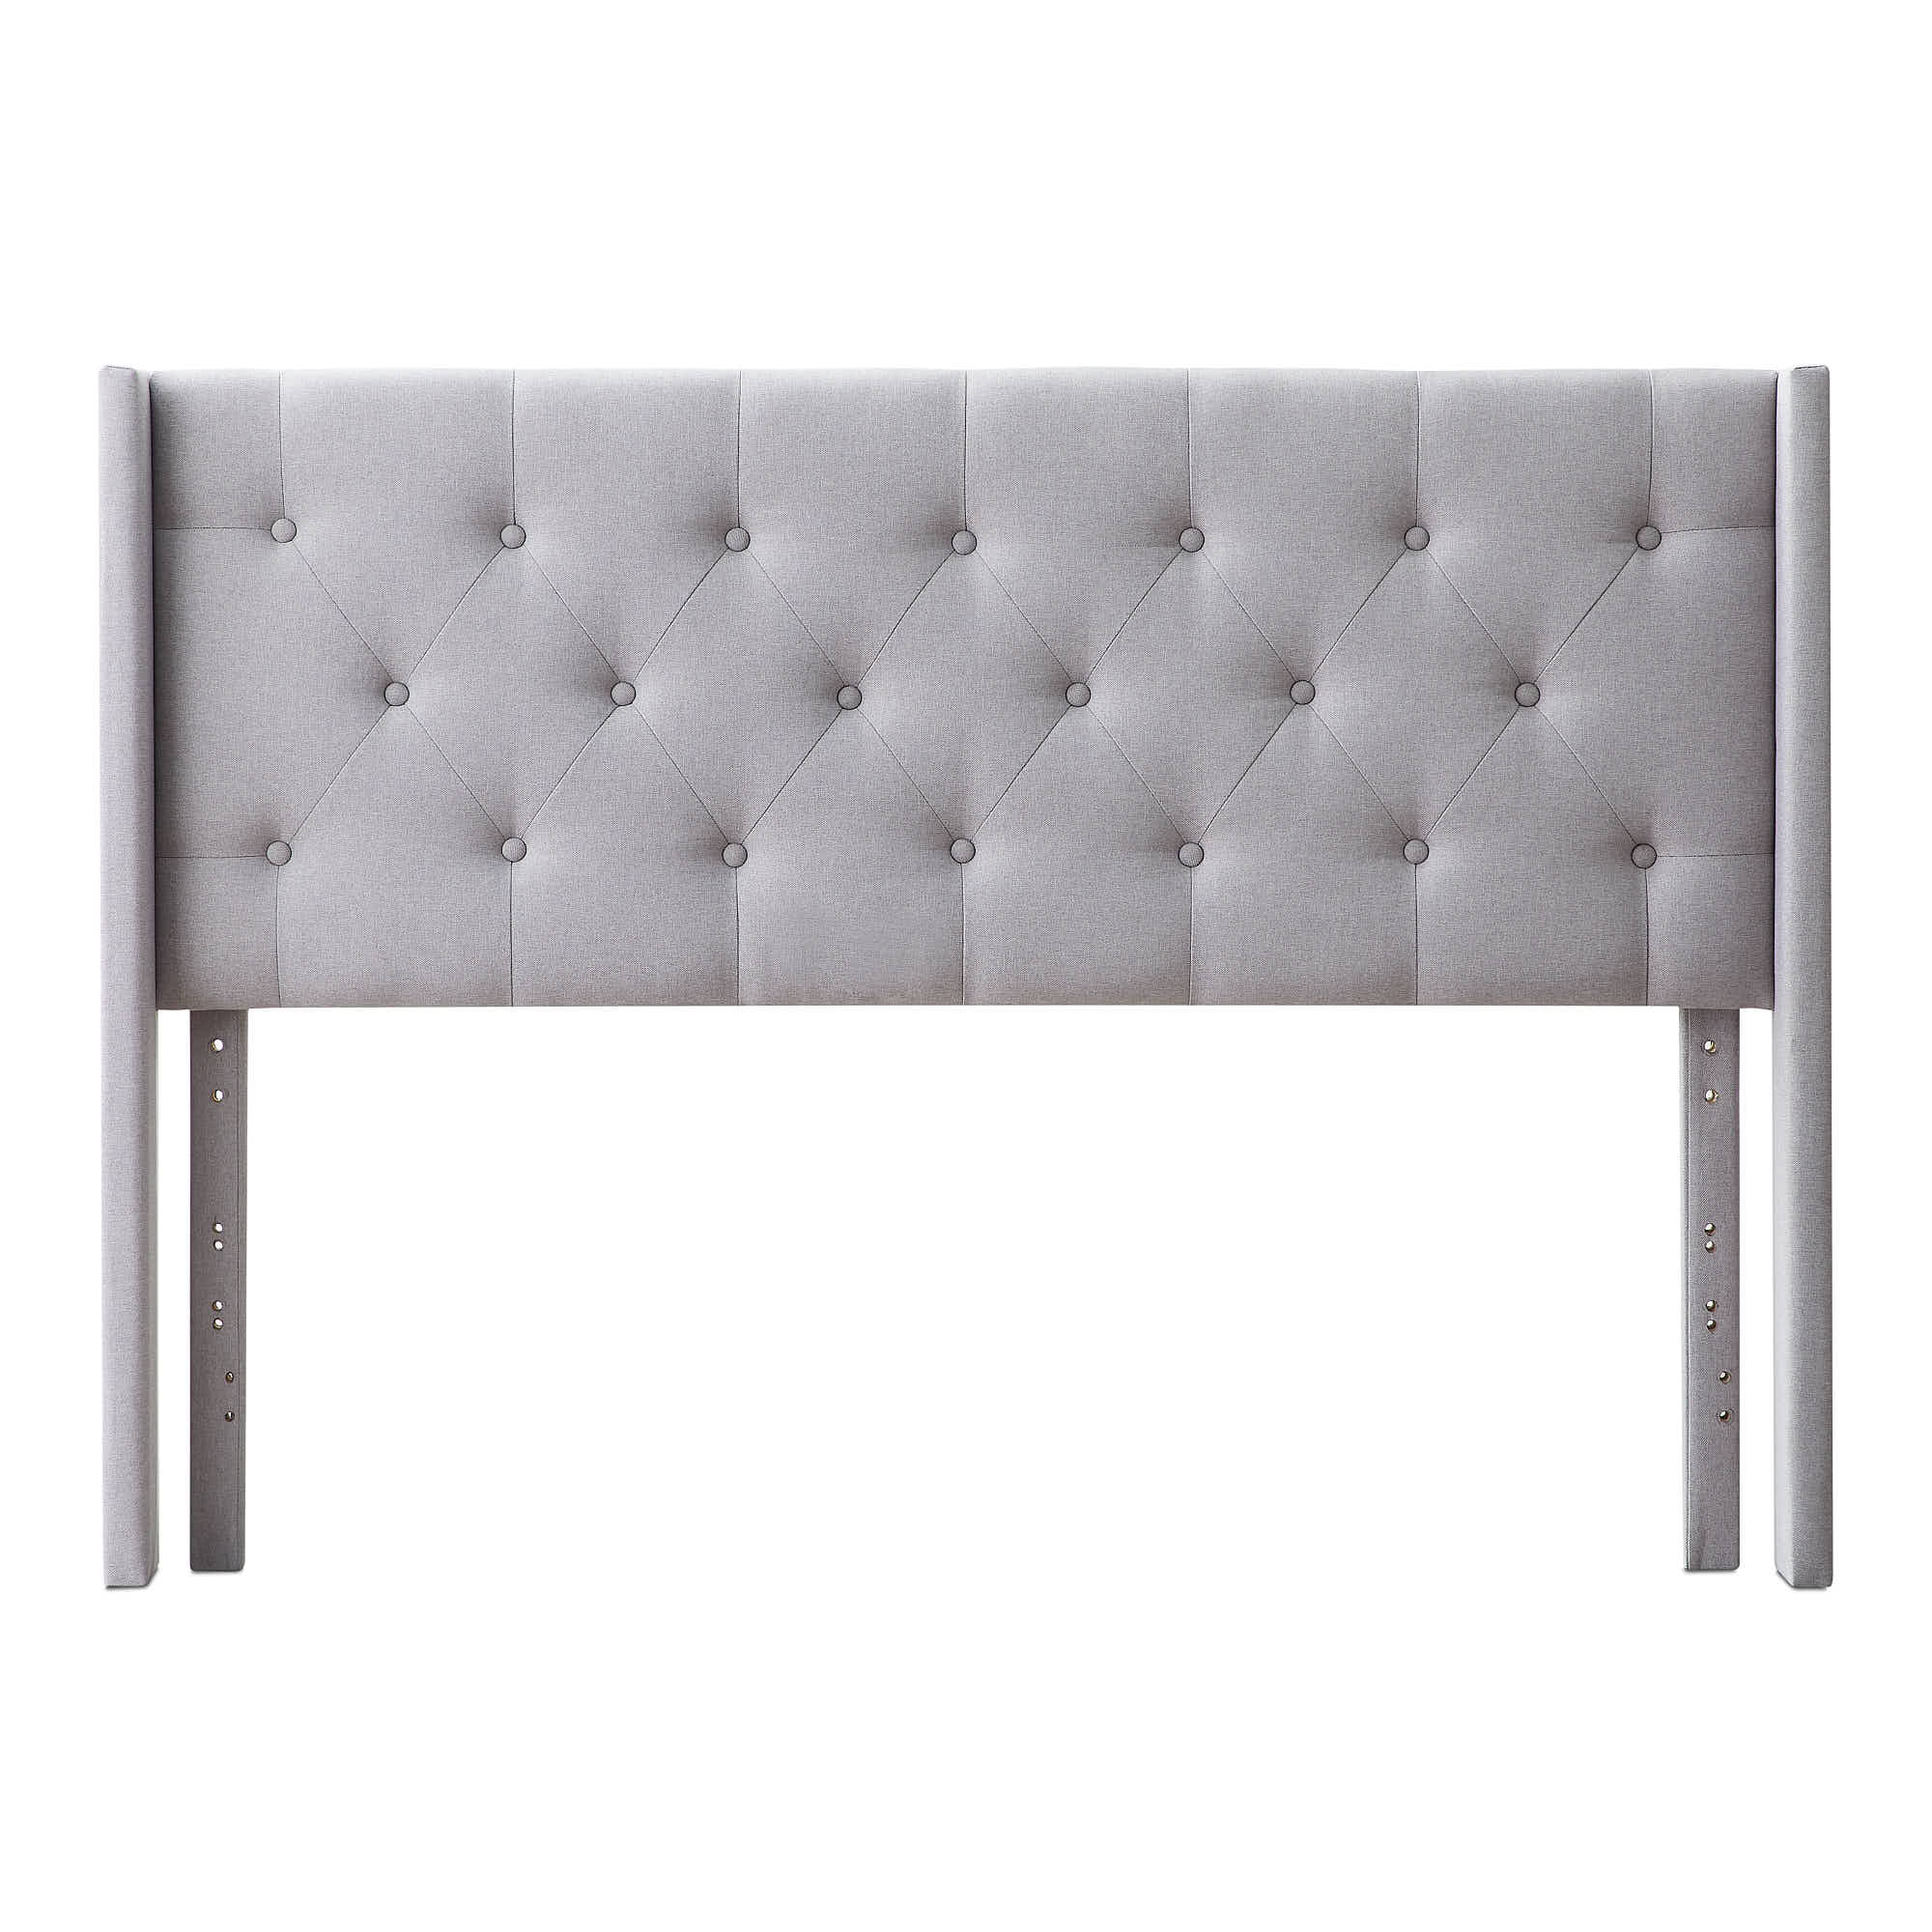 Rest Haven Button Tufted Upholstered Headboard, King/Cal King, Gray - image 4 of 9